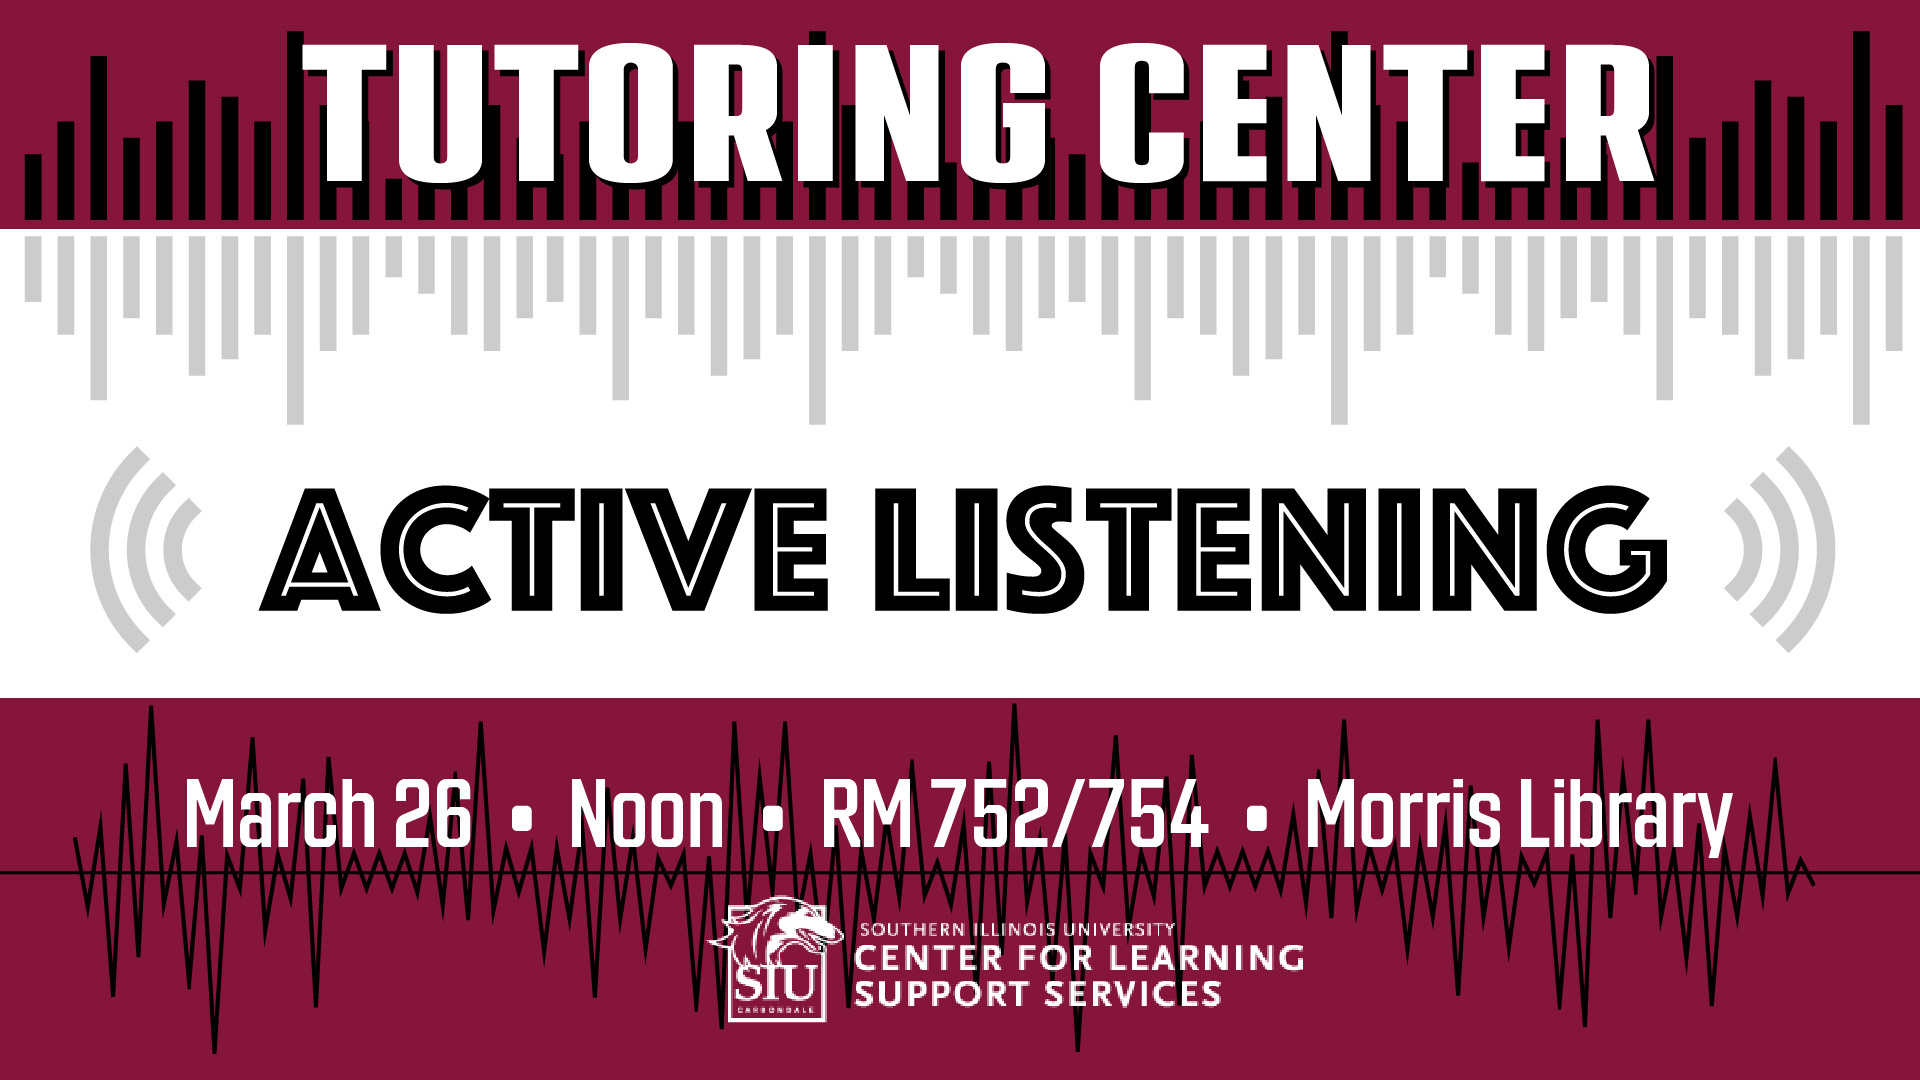 Find out how active listening can improve your learning and relationships from the experts at the Tutoring Center on March 26 at noon in Morris Library Room 752/754.